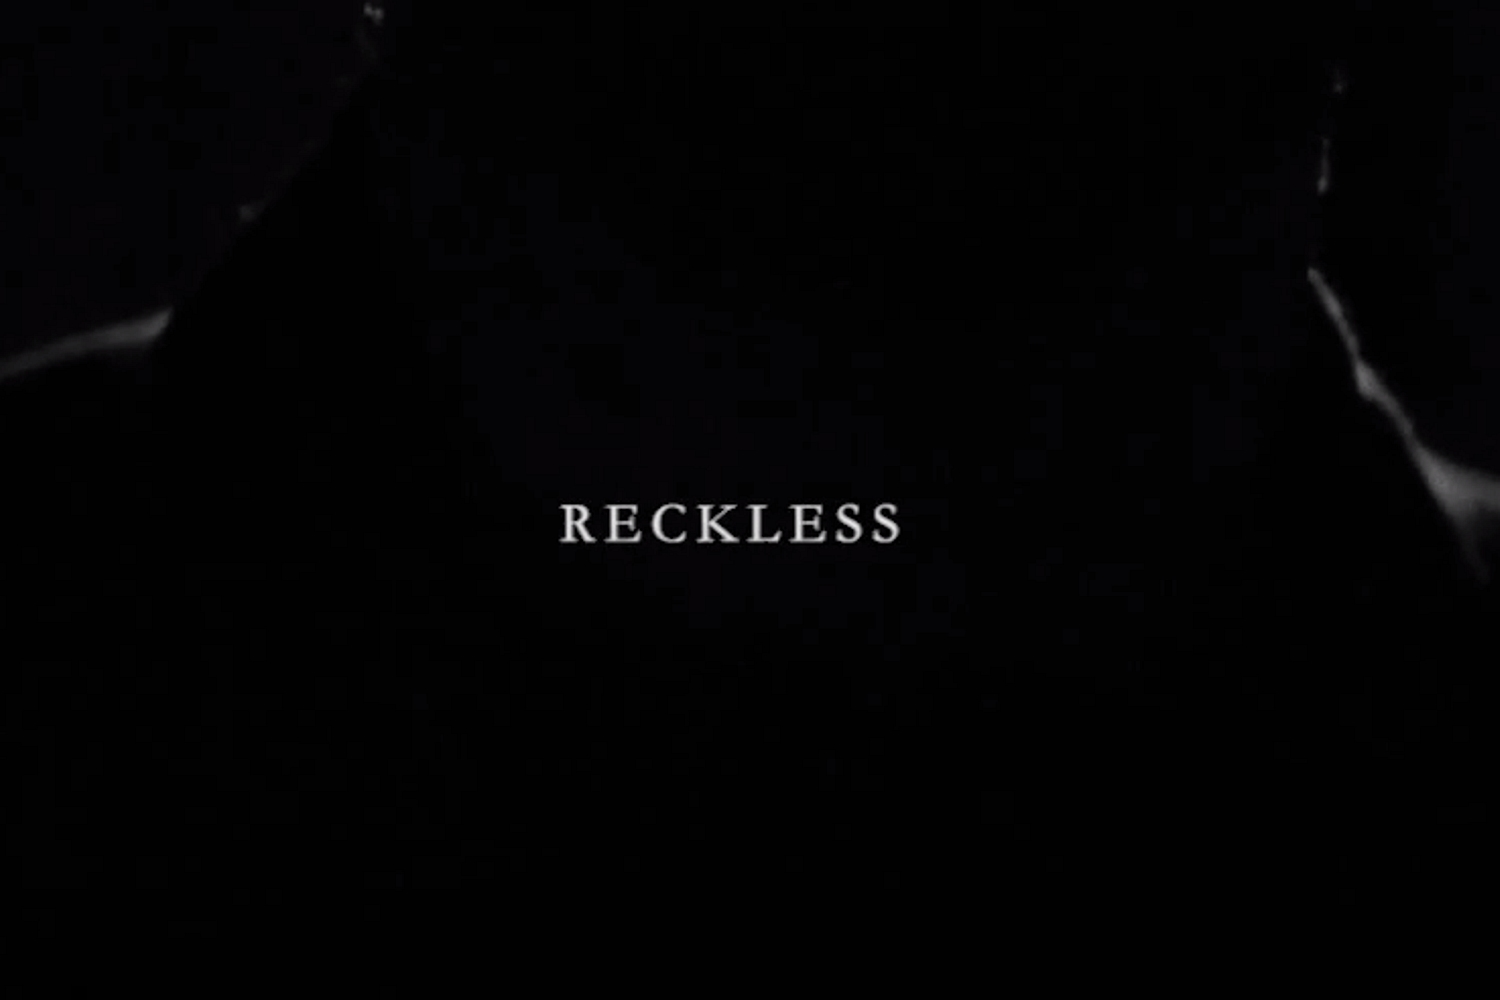 William Arcane scours city streets in new ‘Reckless’ video